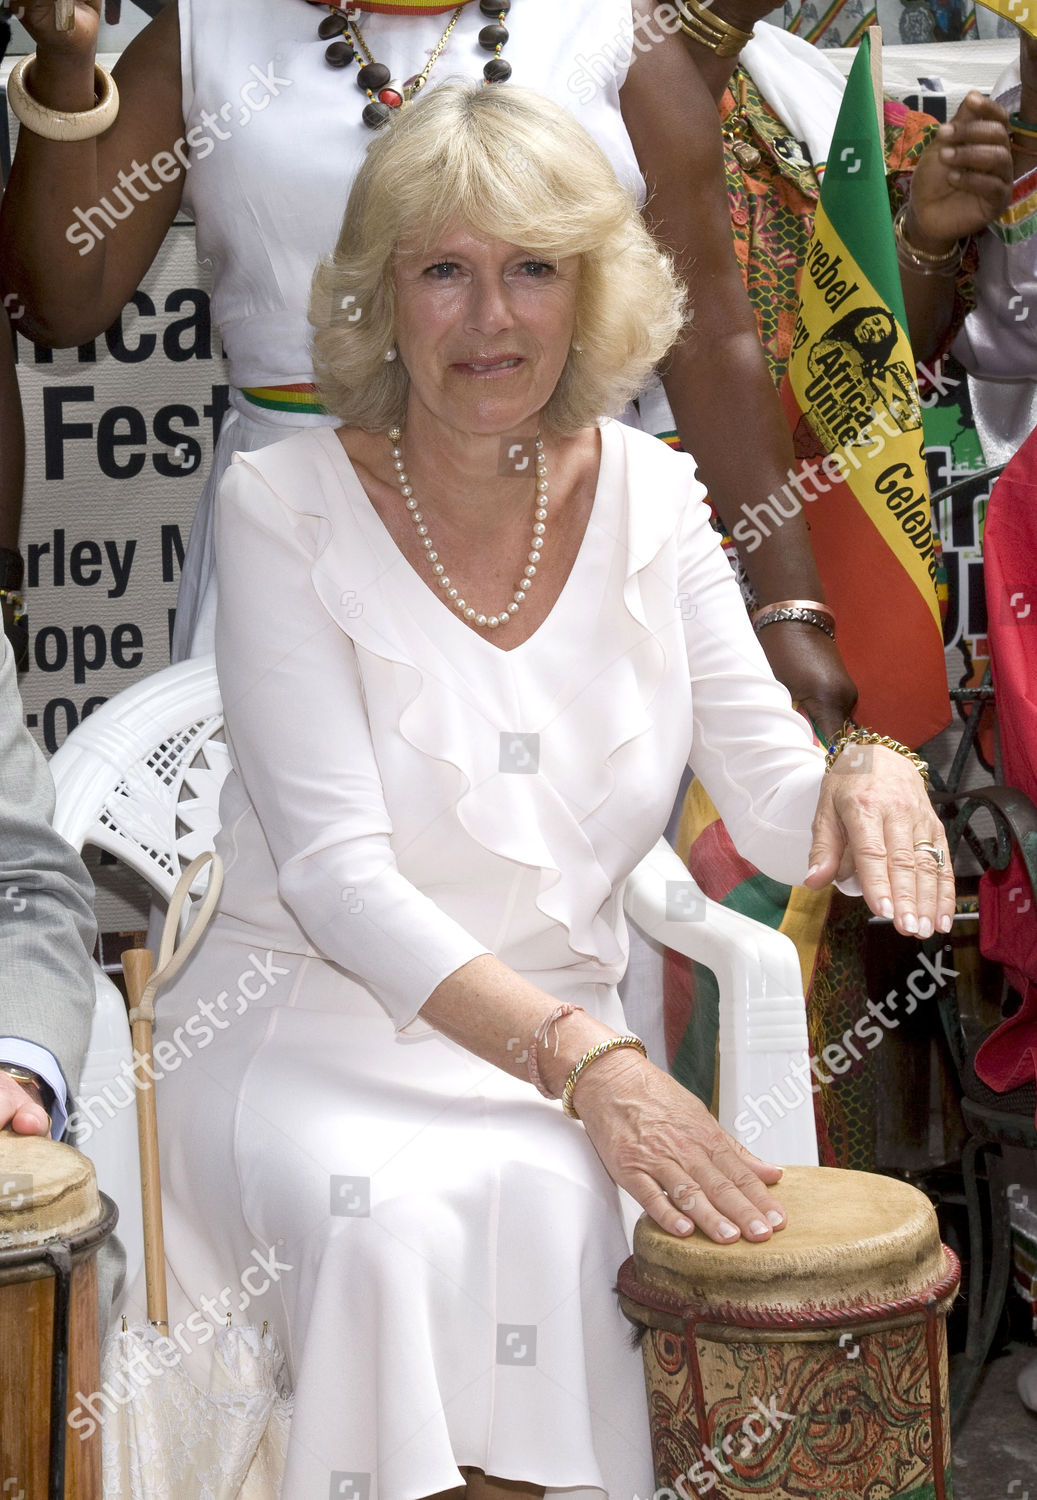 prince-charles-and-camilla-duchess-of-cornwall-visit-jamaica-on-their-caribbean-tour-shutterstock-editorial-742146j.jpg